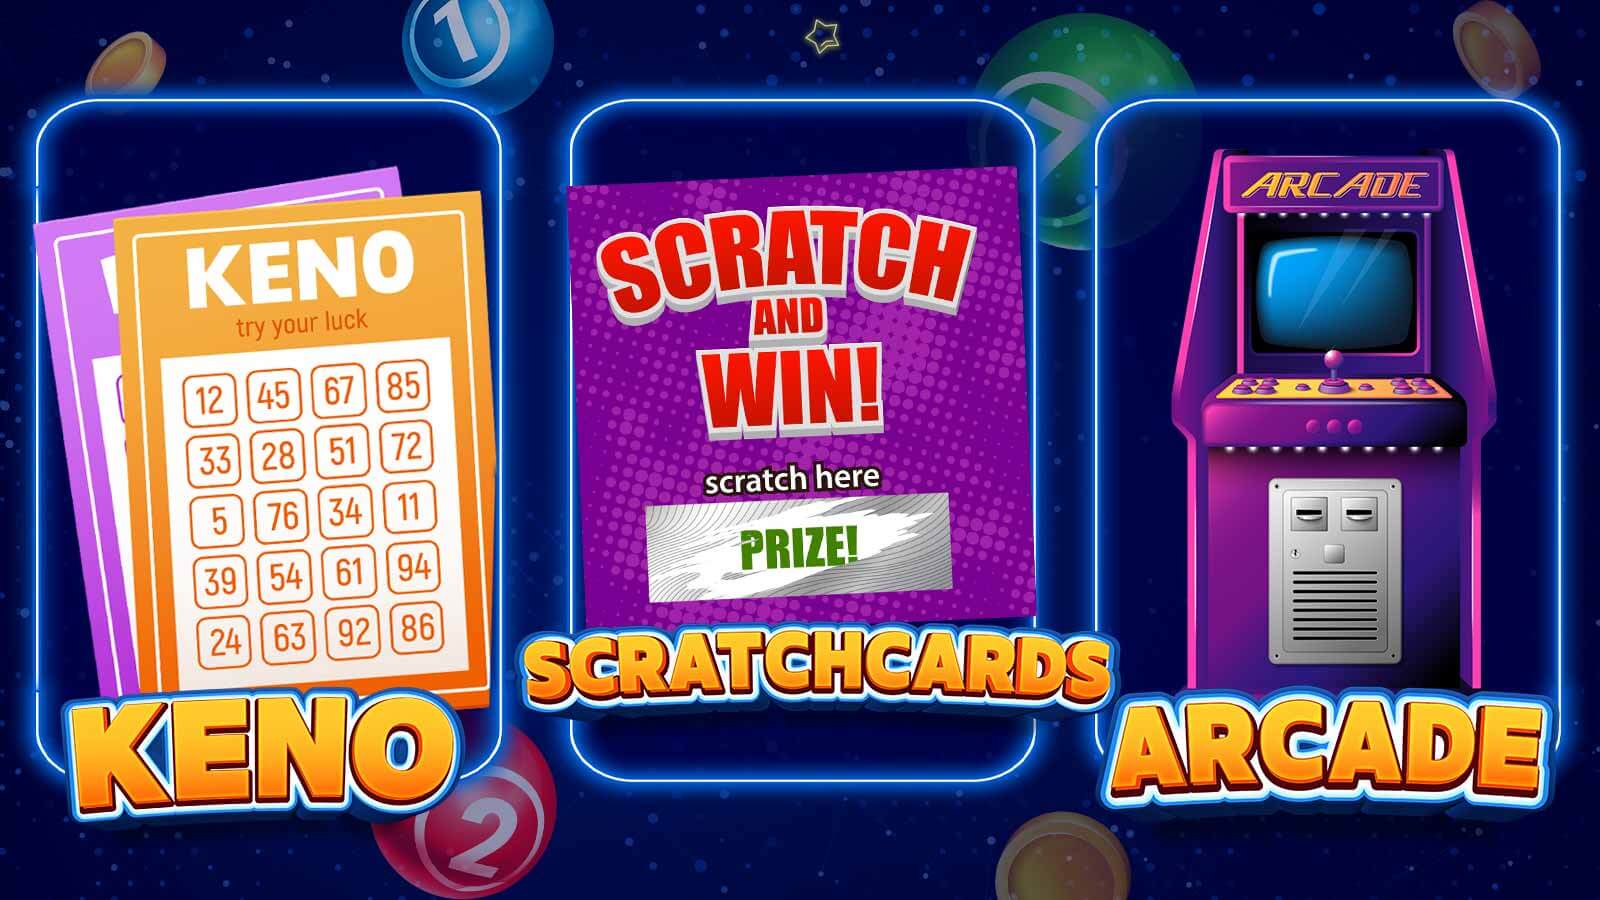 Are Niche Casino Games Like Scratchcards and Keno Worth It?